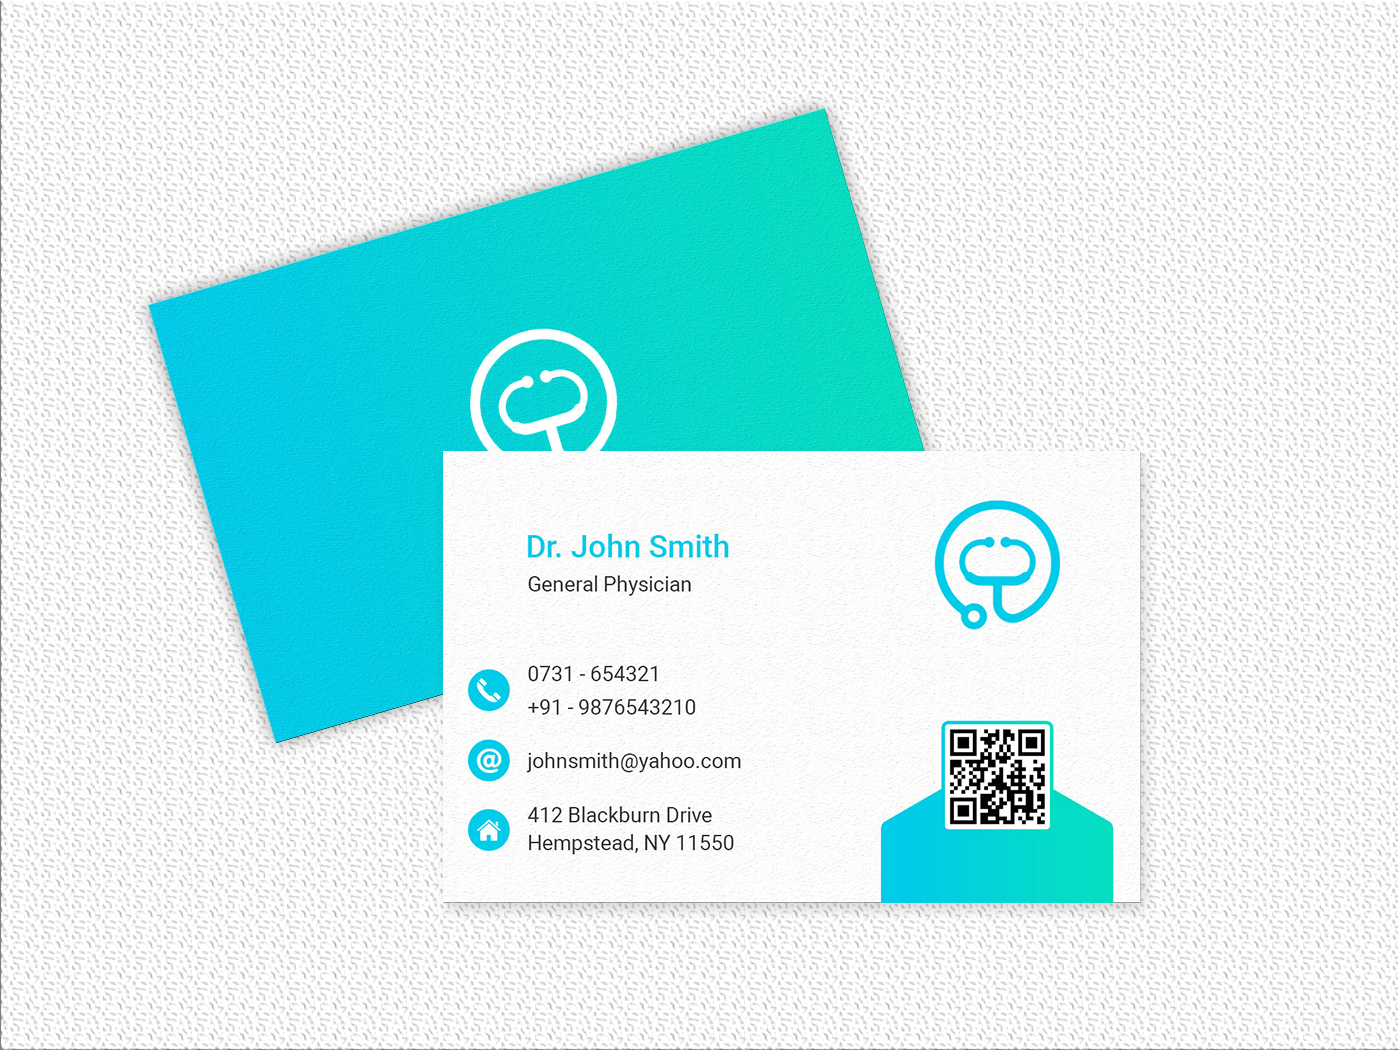 busines card id card profesional Business card design Busines Card Psd doctor business card UI Design Businesss